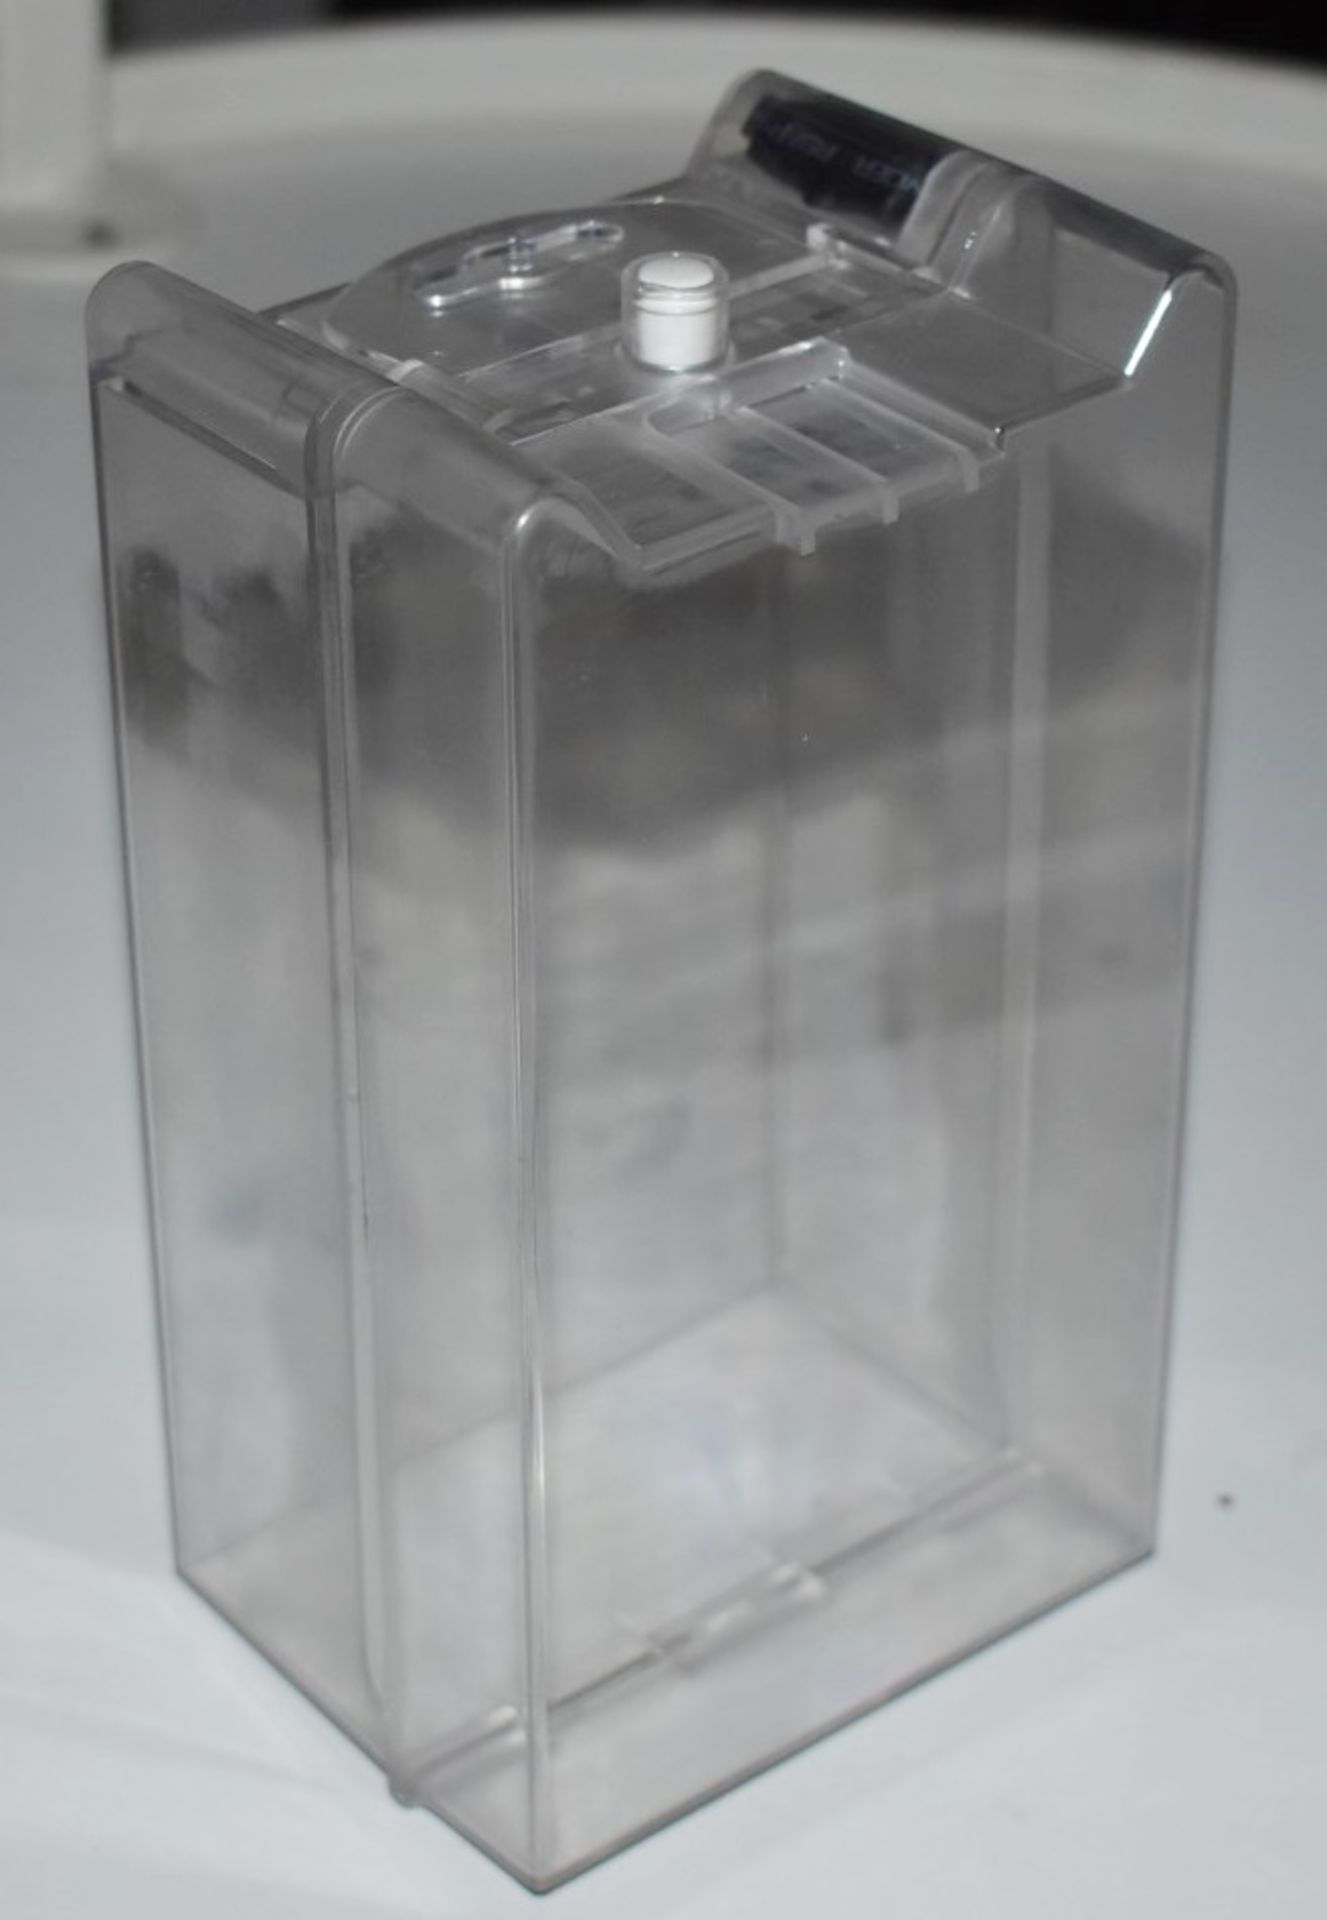 40 x Catalyst Clear Acrylic Retail Security Safer Cases With RF Tags and Hanging Tags - Brand New - Image 2 of 9